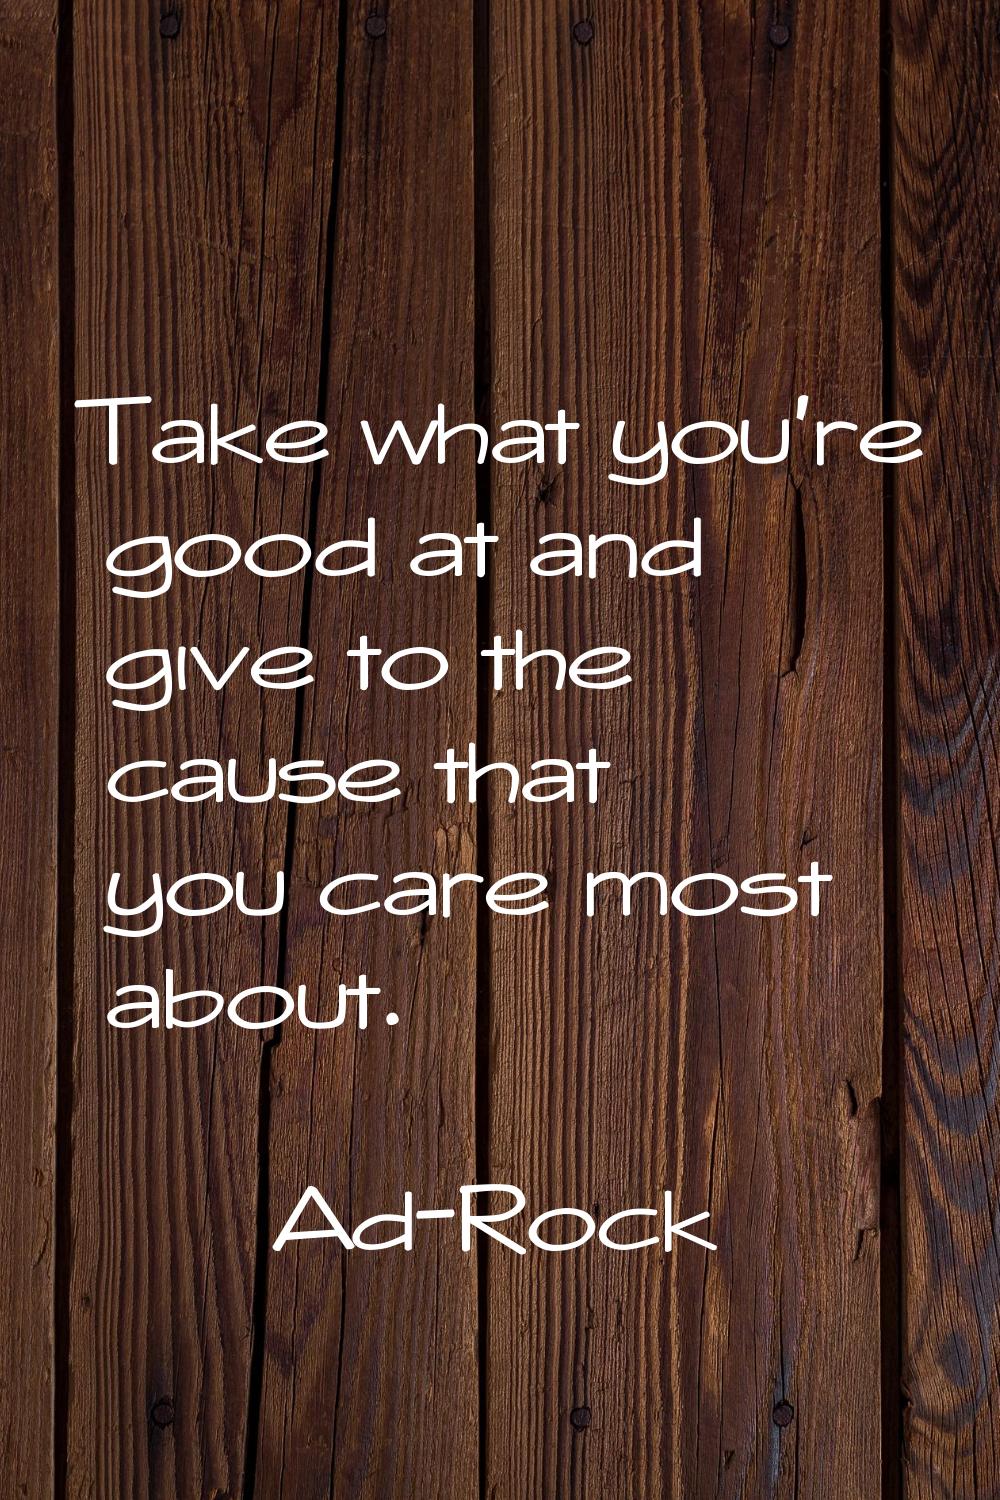 Take what you're good at and give to the cause that you care most about.